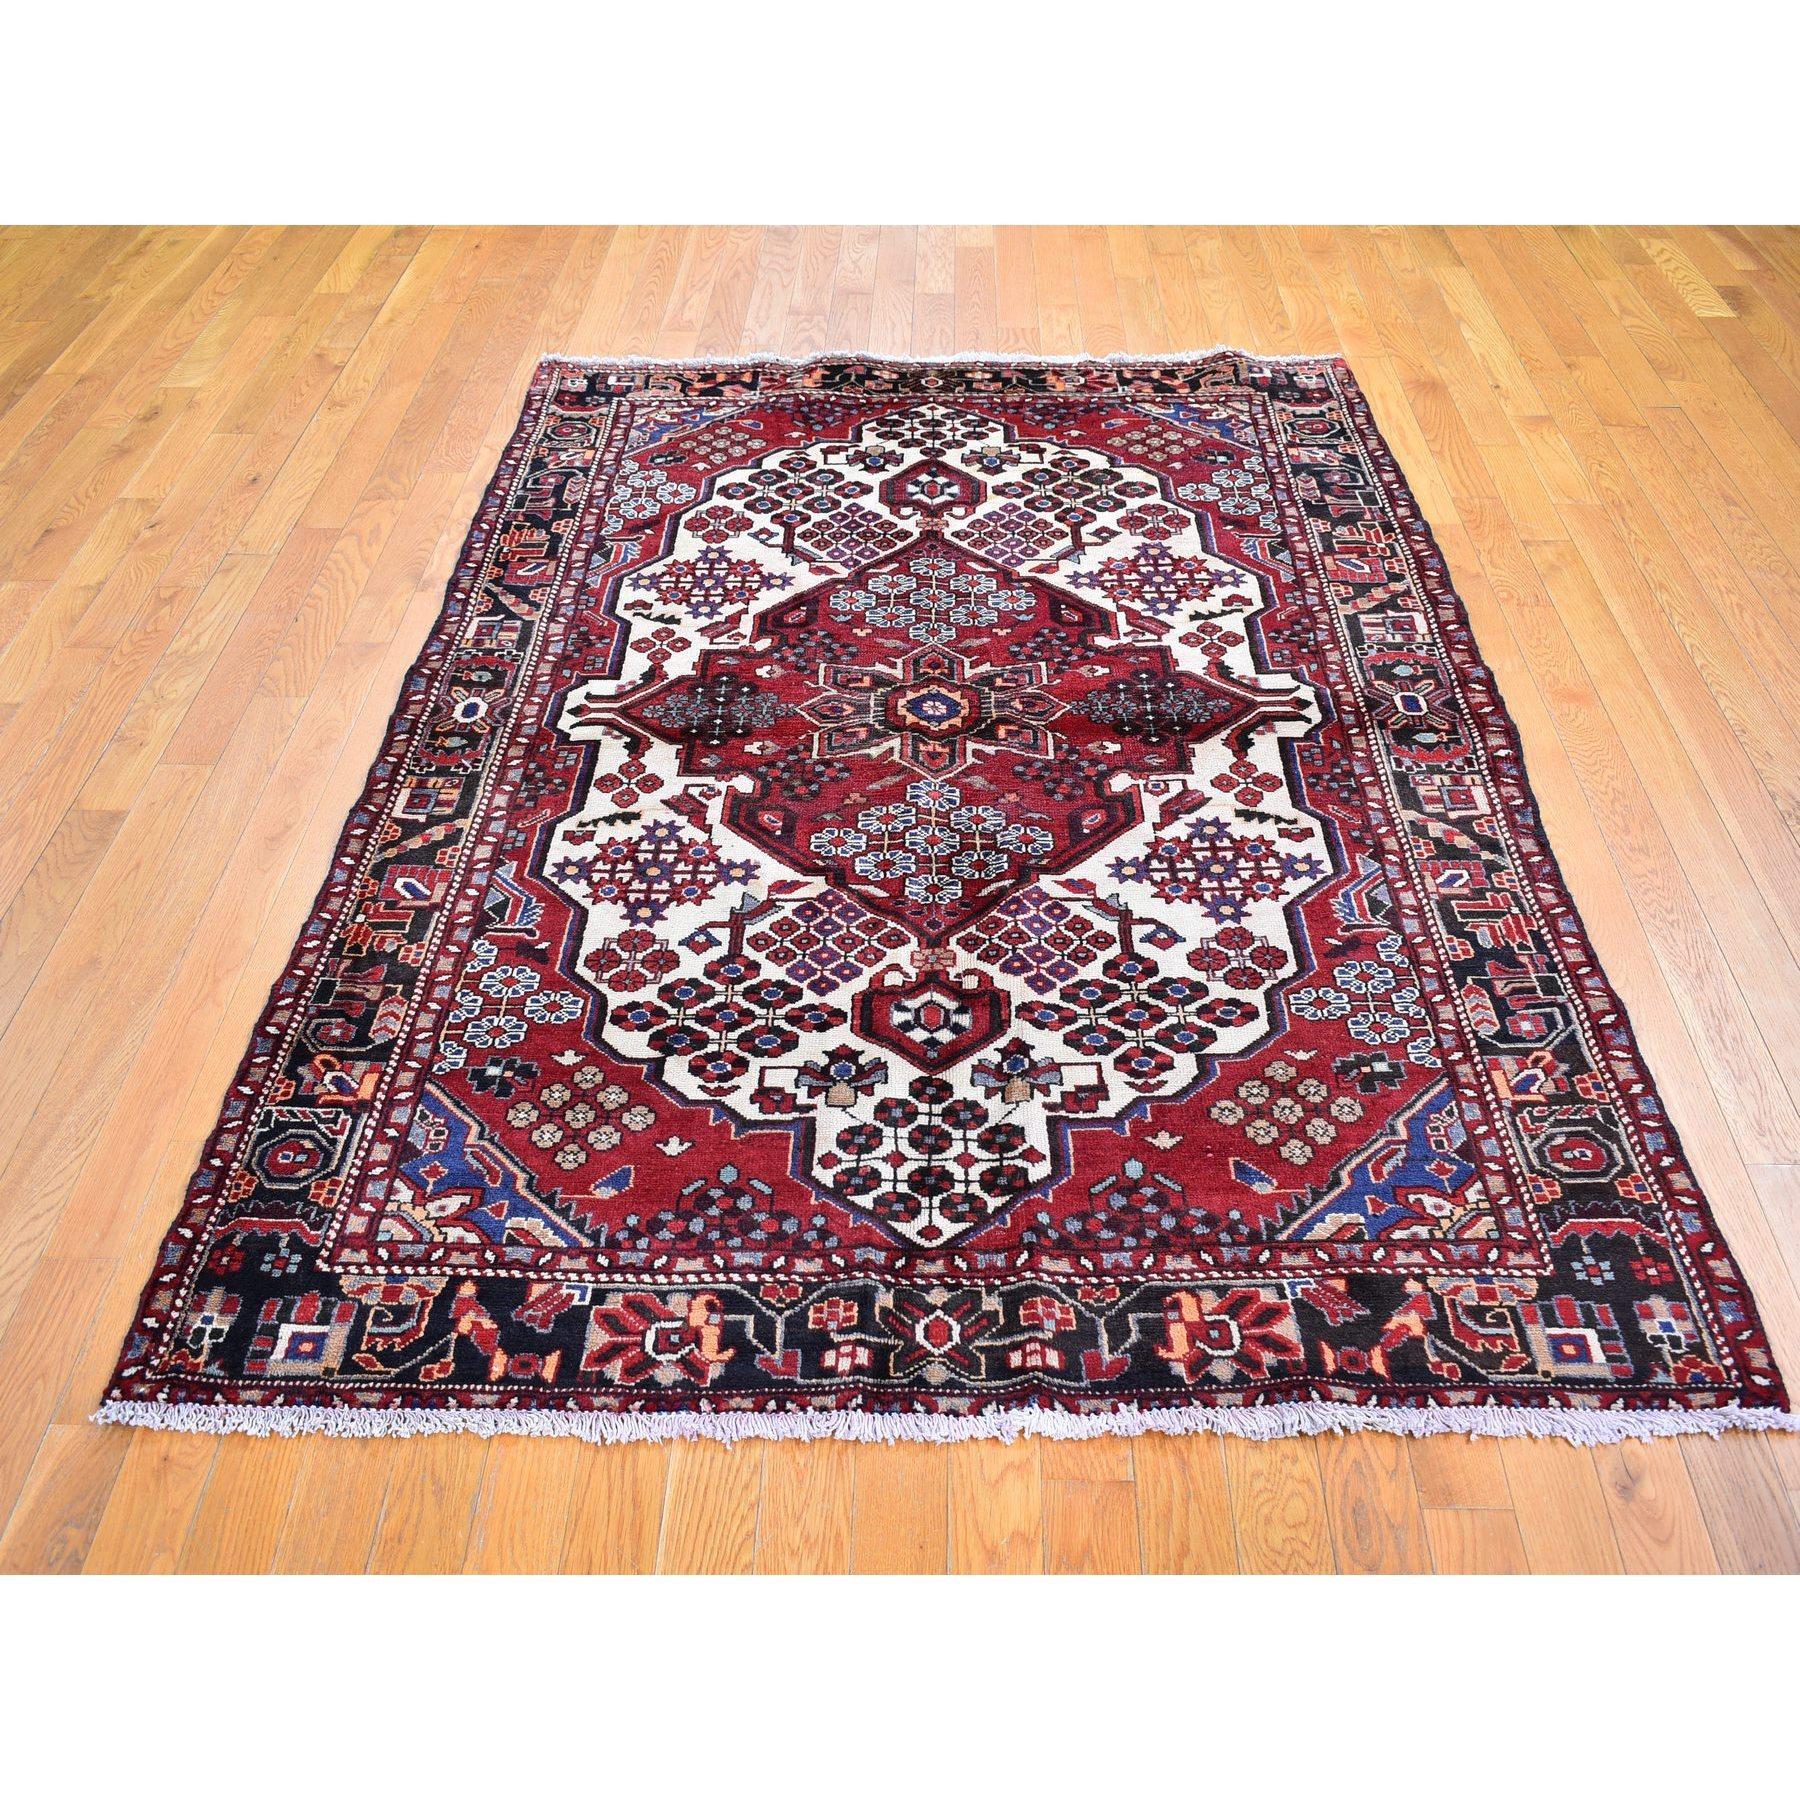 This fabulous hand-knotted carpet has been created and designed for extra strength and durability. This rug has been handcrafted for weeks in the traditional method that is used to make
Exact Rug Size in Feet and Inches : 5'1